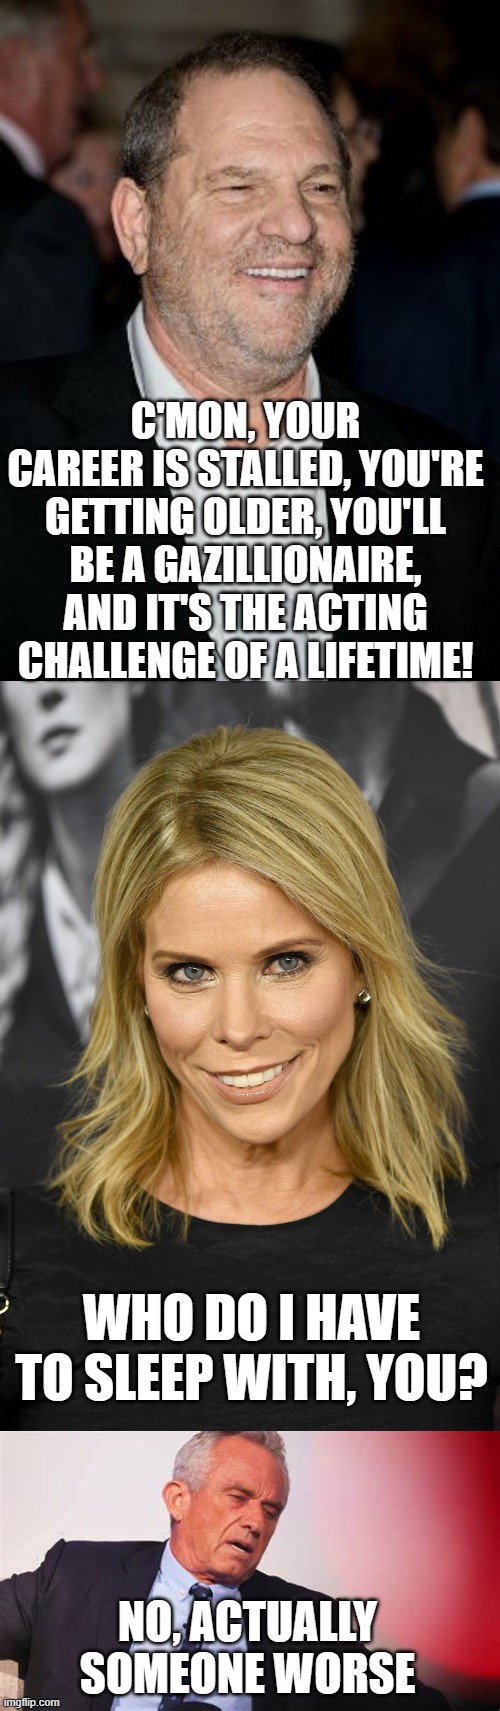 I don't know, maybe she really loves him | C'MON, YOUR CAREER IS STALLED, YOU'RE GETTING OLDER, YOU'LL BE A GAZILLIONAIRE, AND IT'S THE ACTING CHALLENGE OF A LIFETIME! WHO DO I HAVE TO SLEEP WITH, YOU? NO, ACTUALLY SOMEONE WORSE | image tagged in rfk jr,hollywood | made w/ Imgflip meme maker